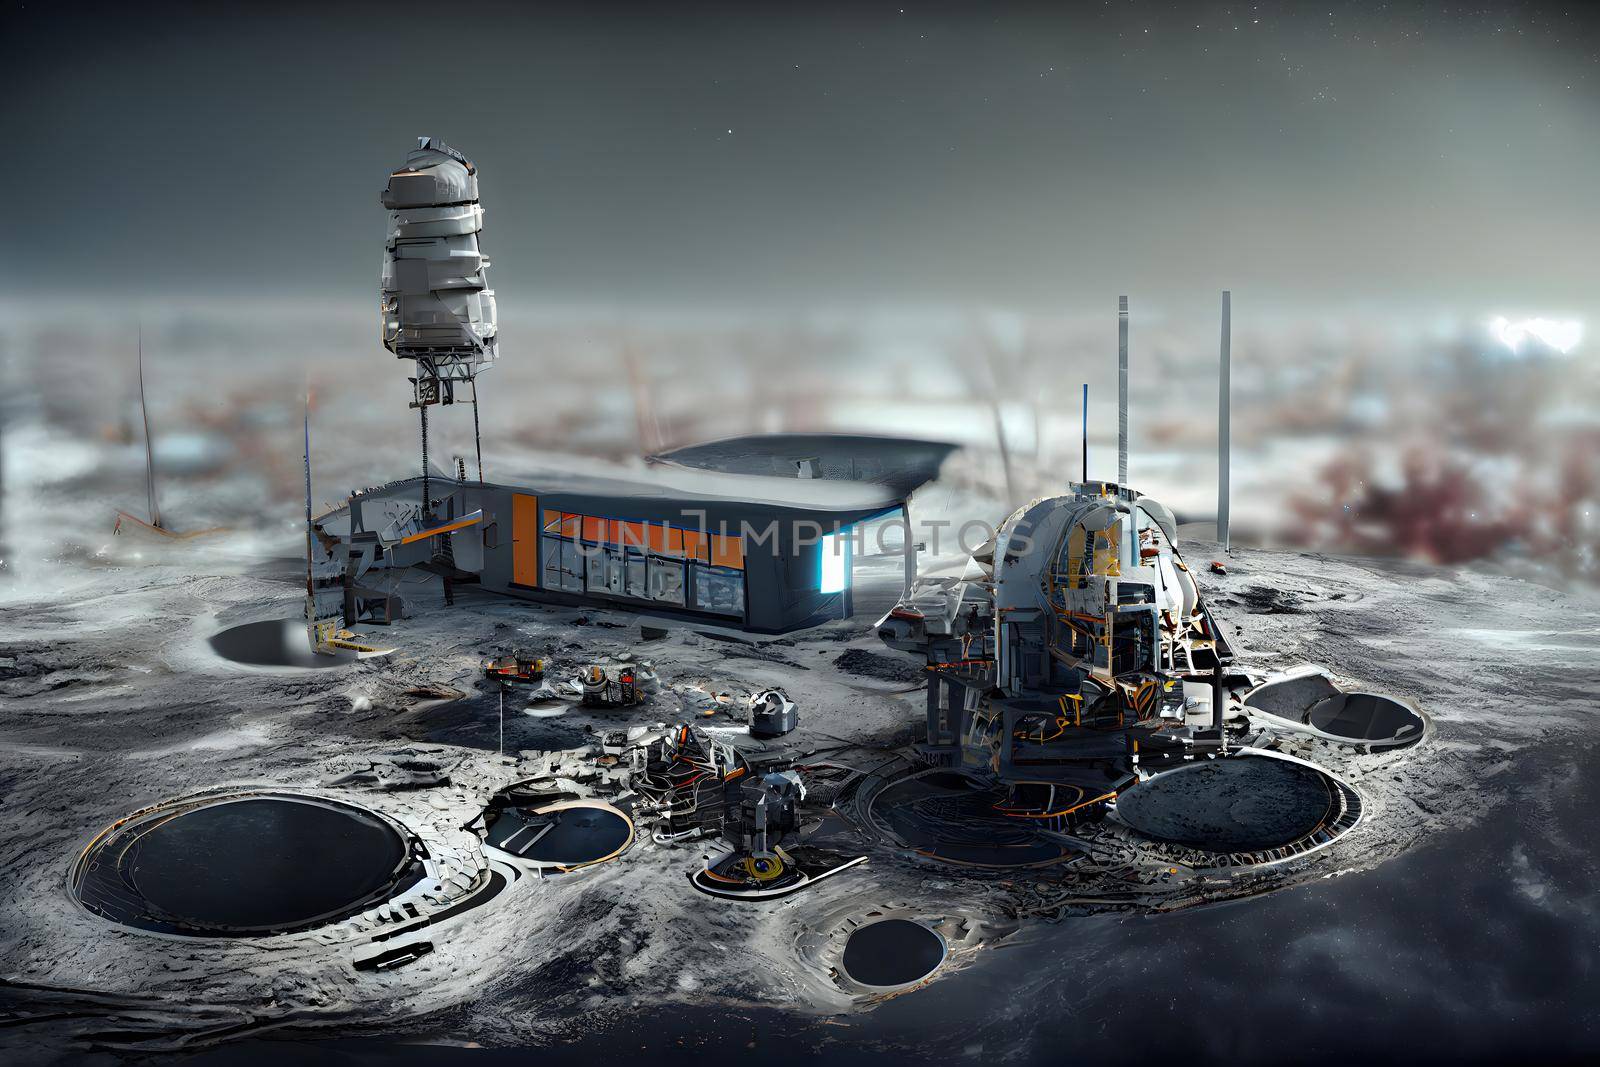 Moon base structures, neural network generated art by z1b